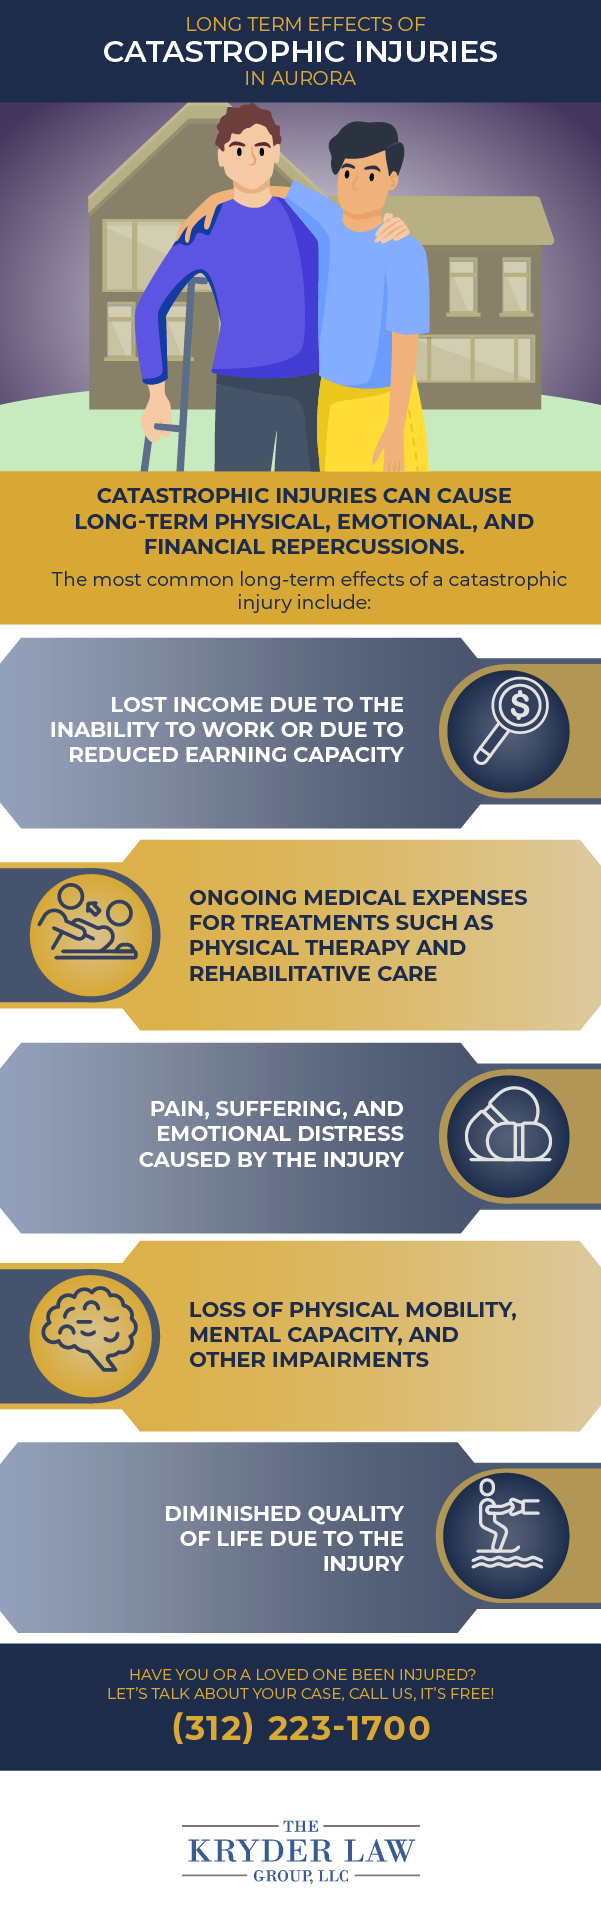 Long Term Effects of Catastrophic Injuries in Aurora Infographic